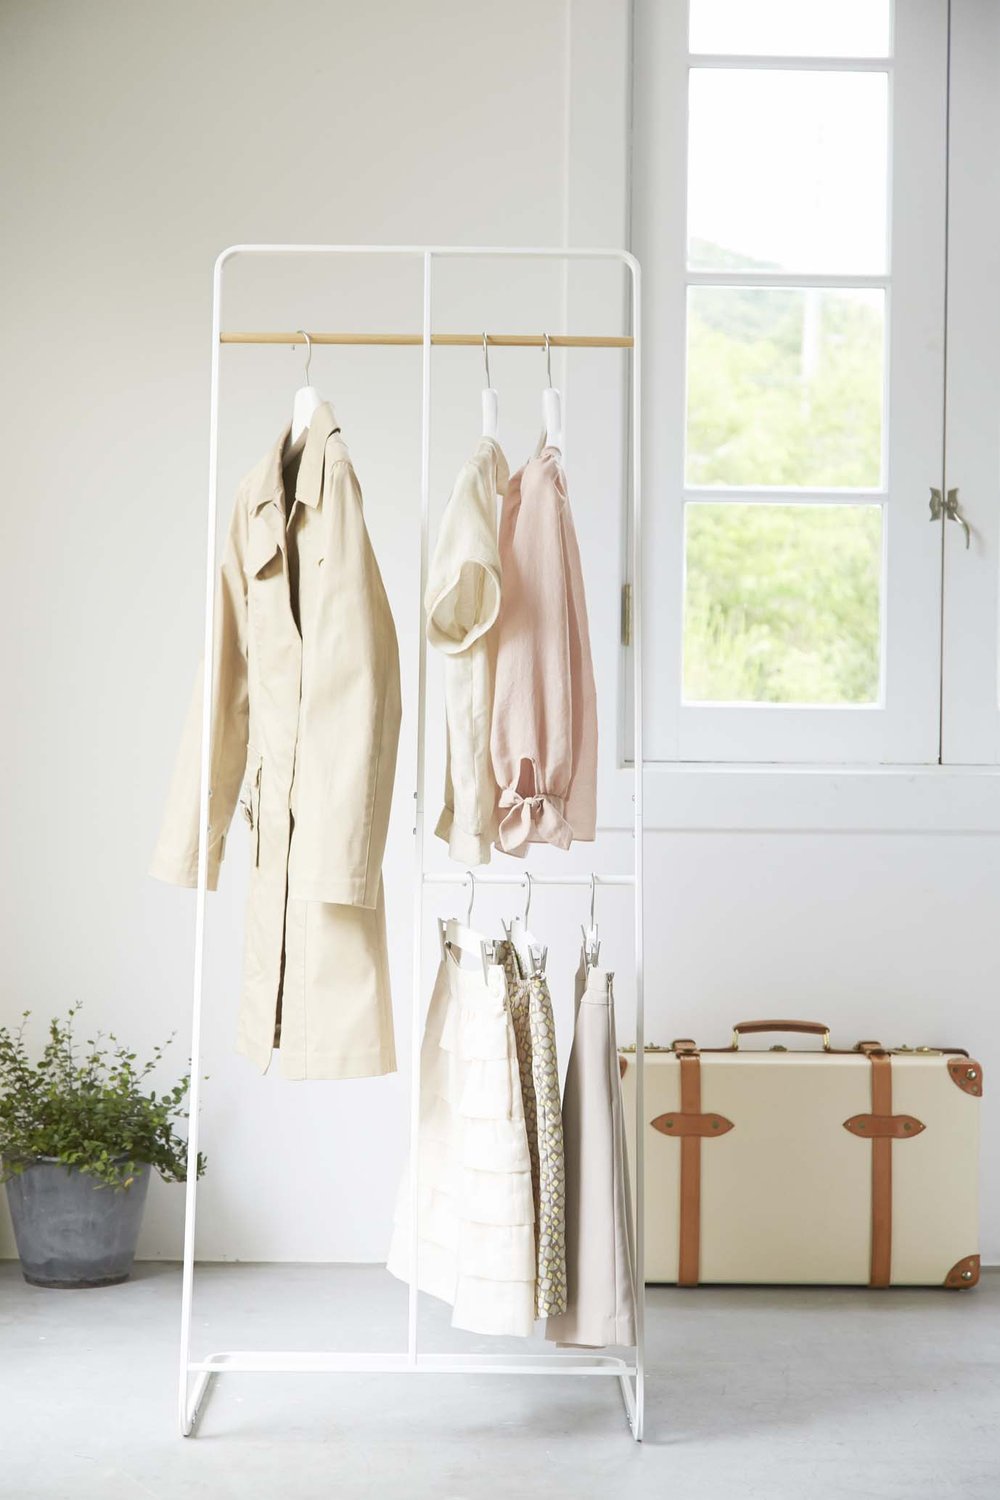 Garment rack with clothing hanging